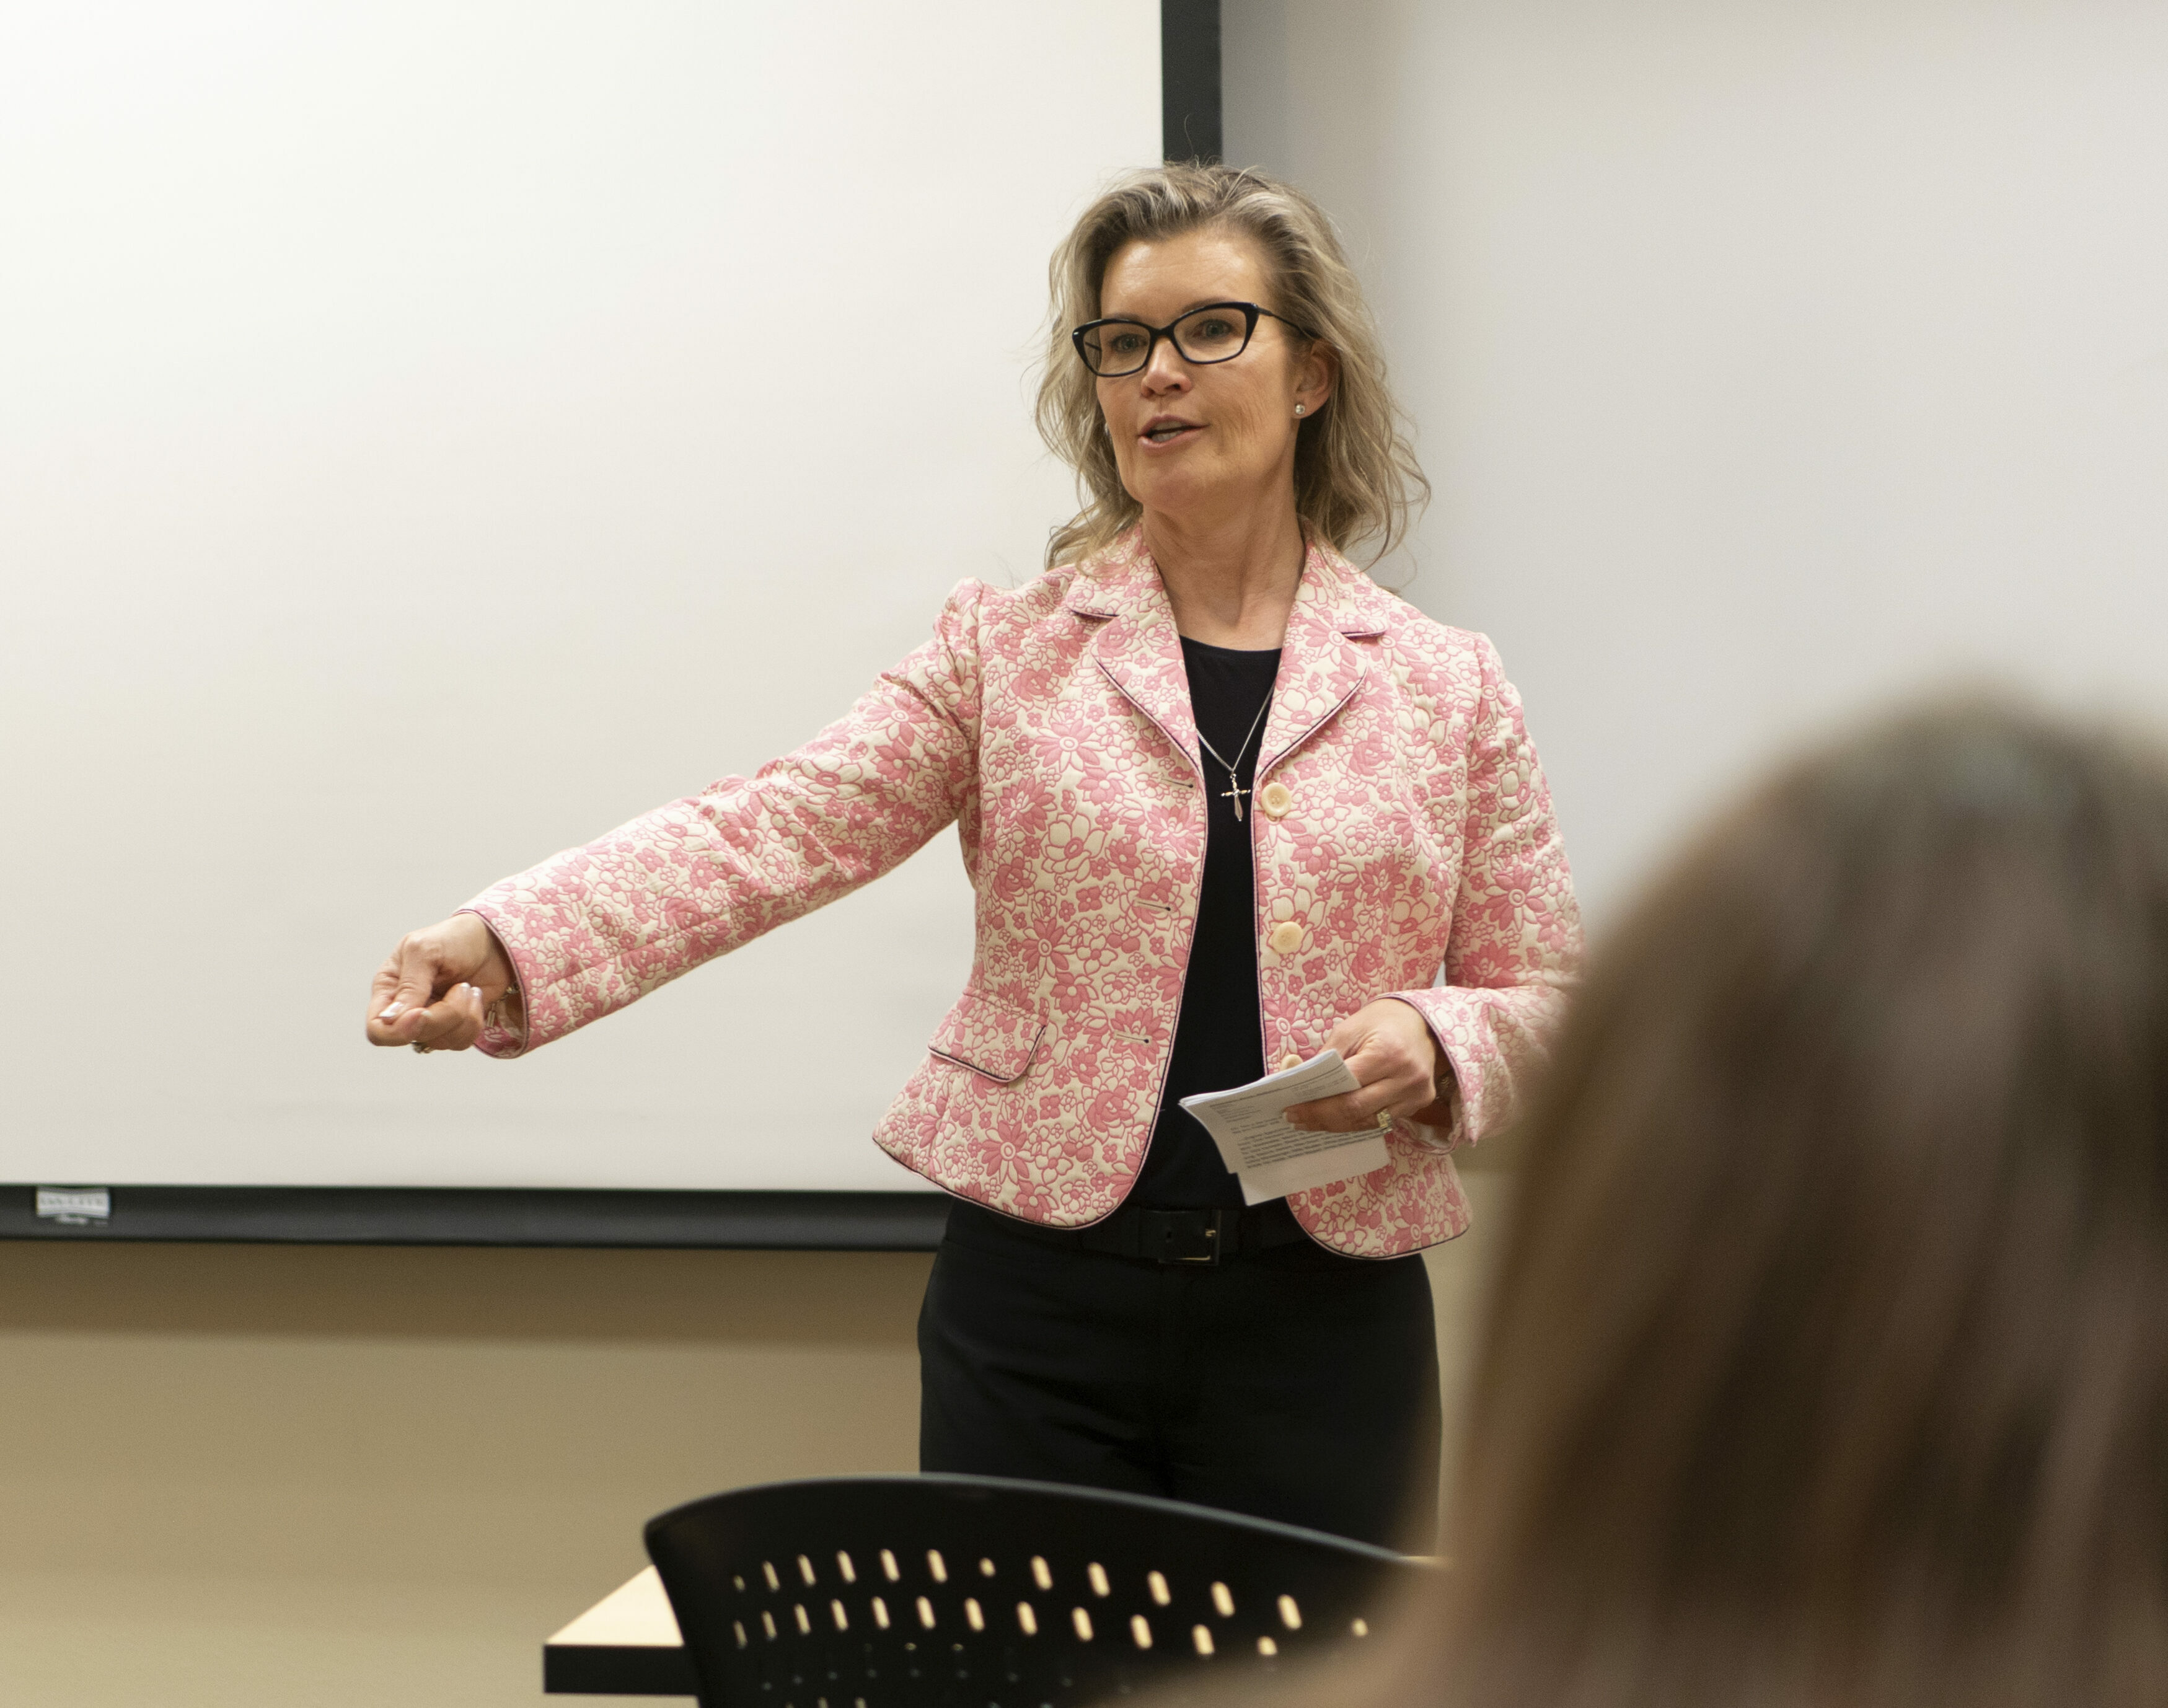 A professor in a pink jacket lectures to the class